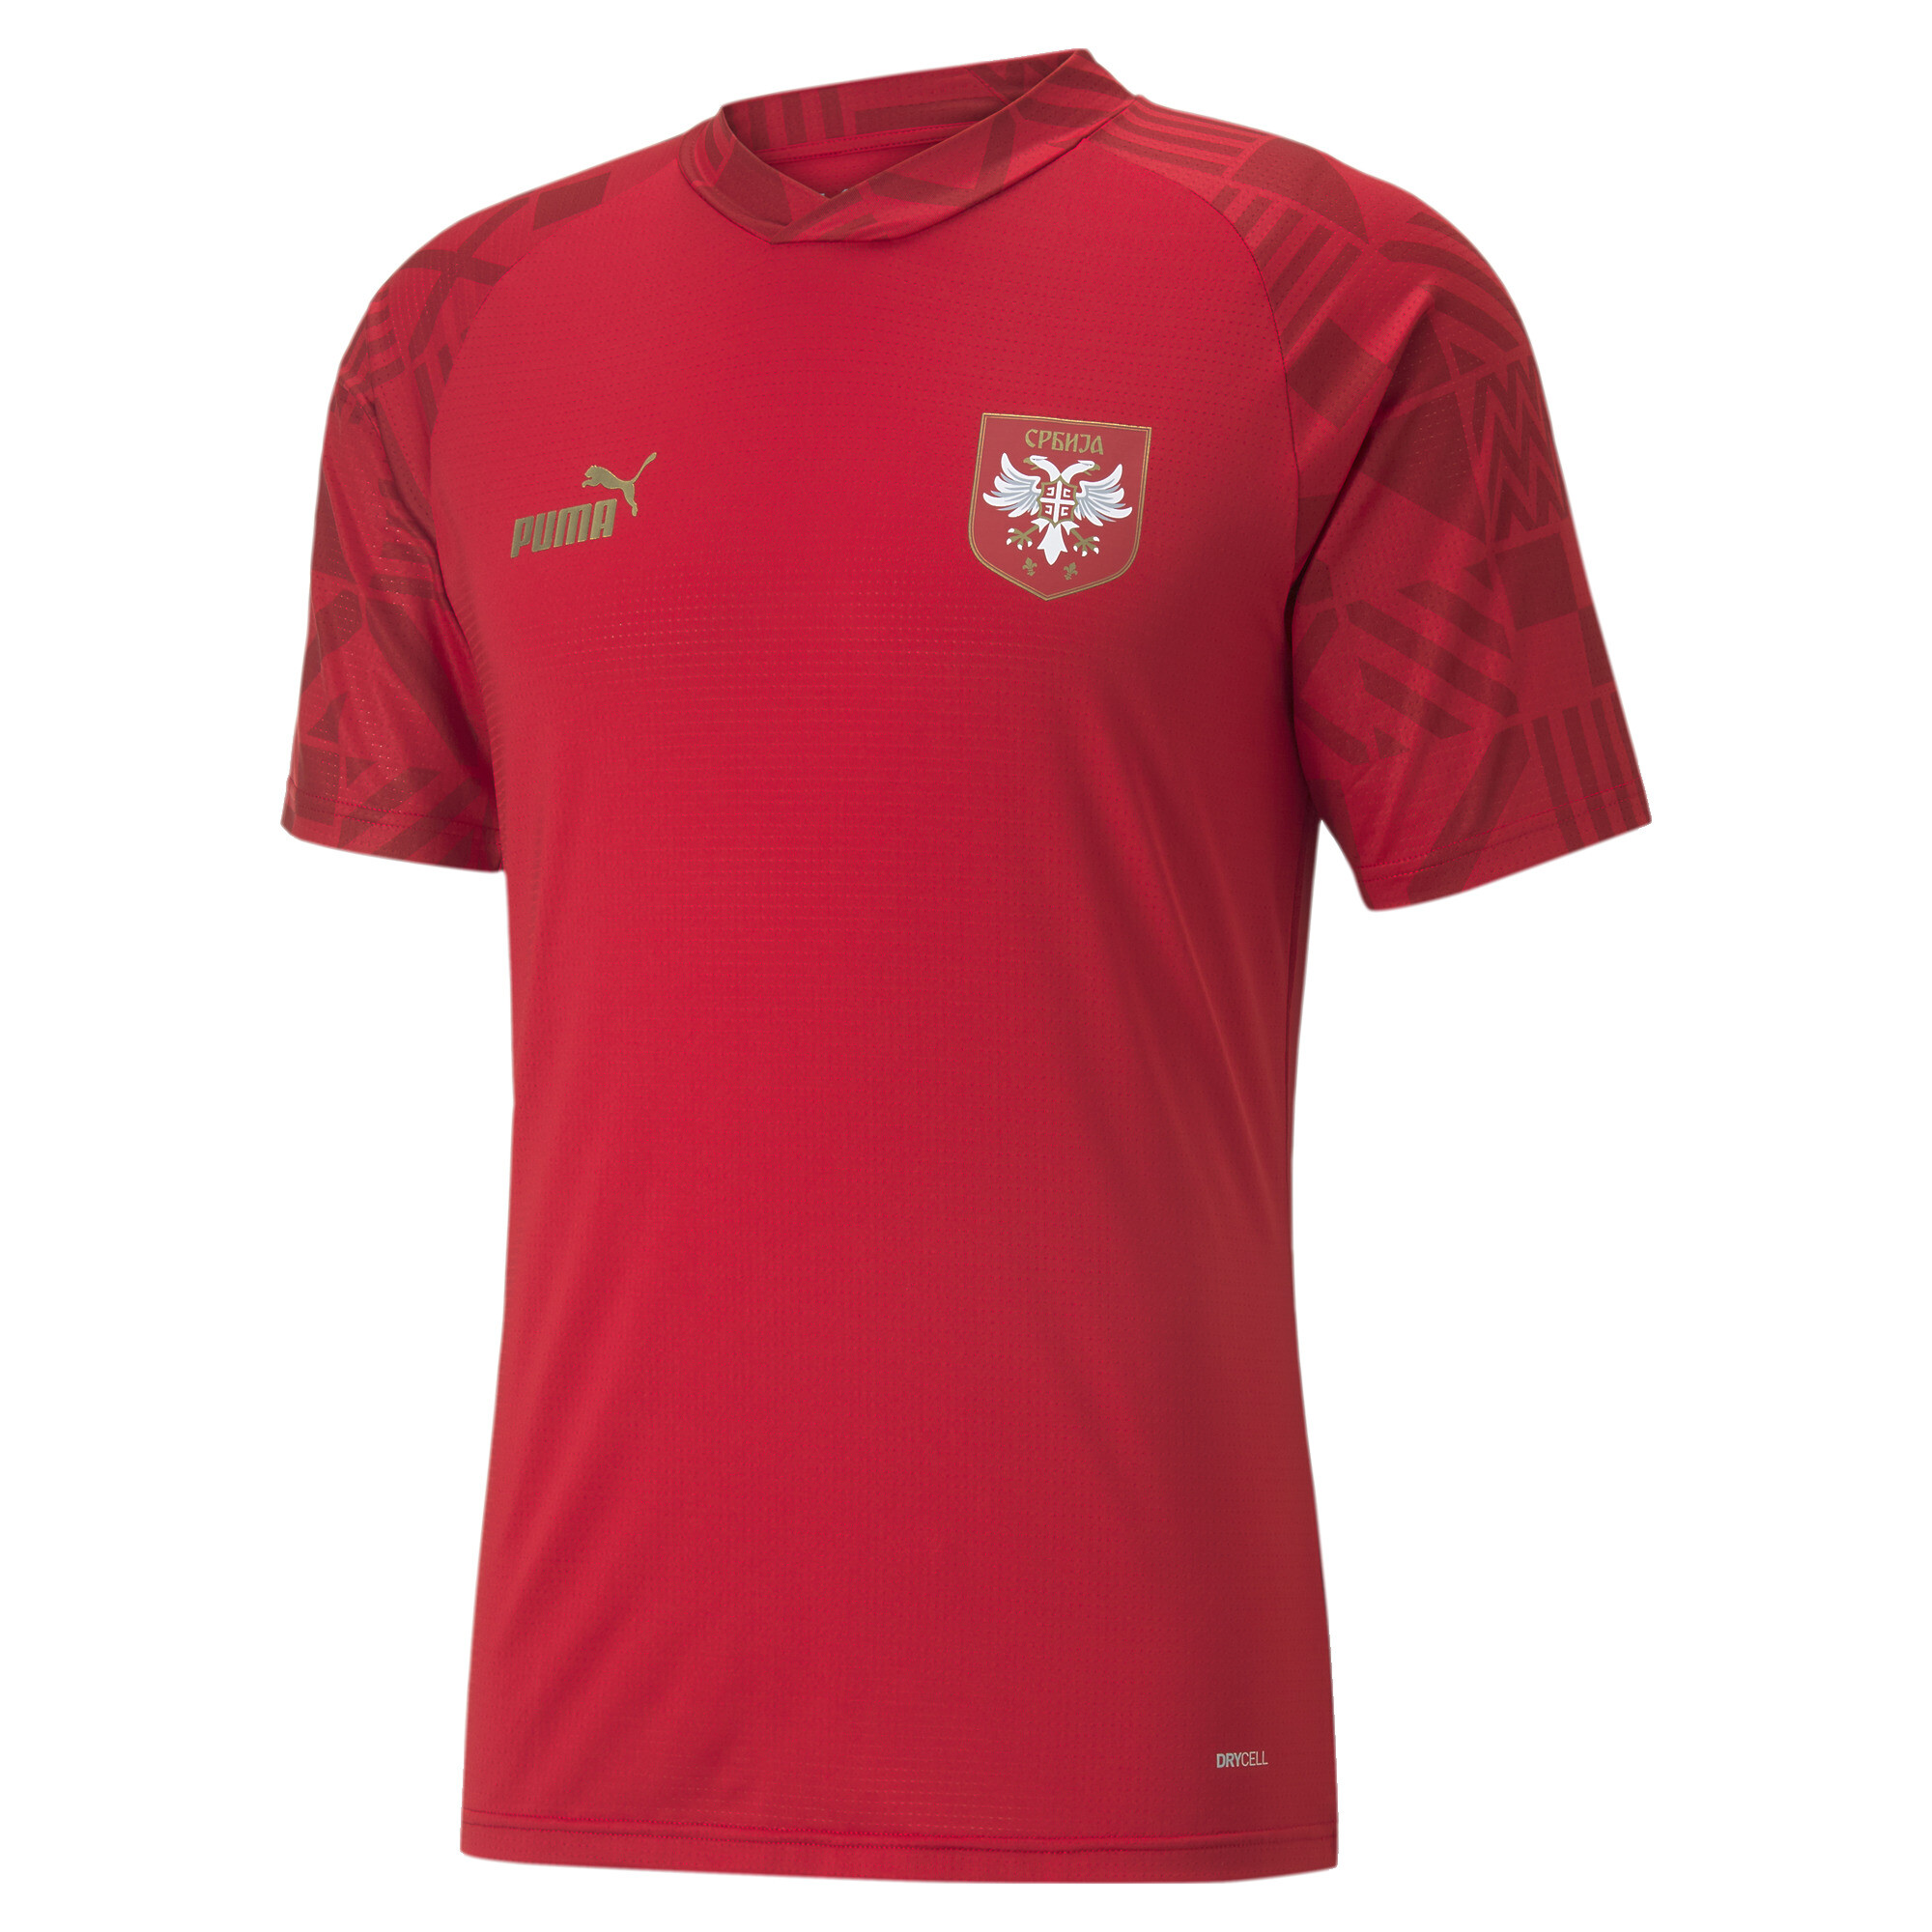 Men's Puma Serbia Football Prematch Jersey, Red, Size 3XL, Clothing